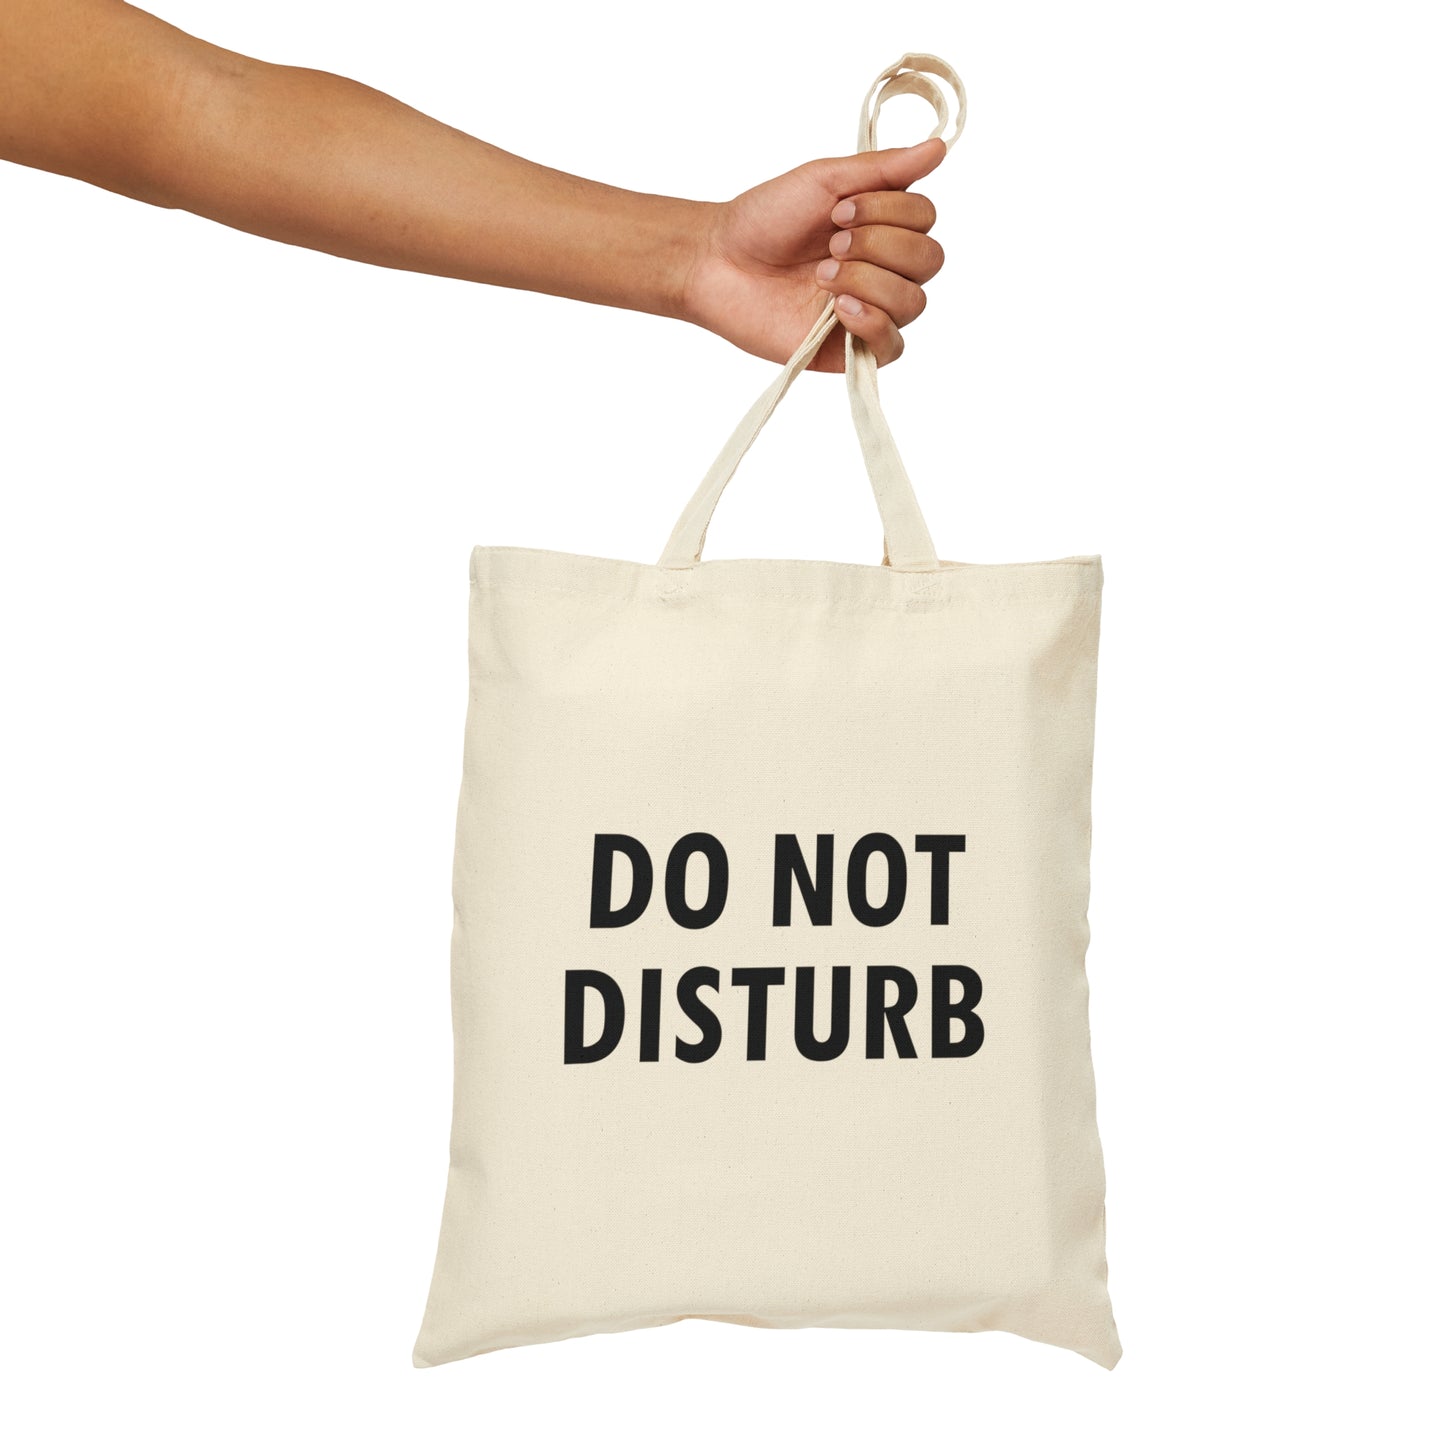 Do Not Disturb Funny Motivational Quotes Canvas Shopping Cotton Tote Bag